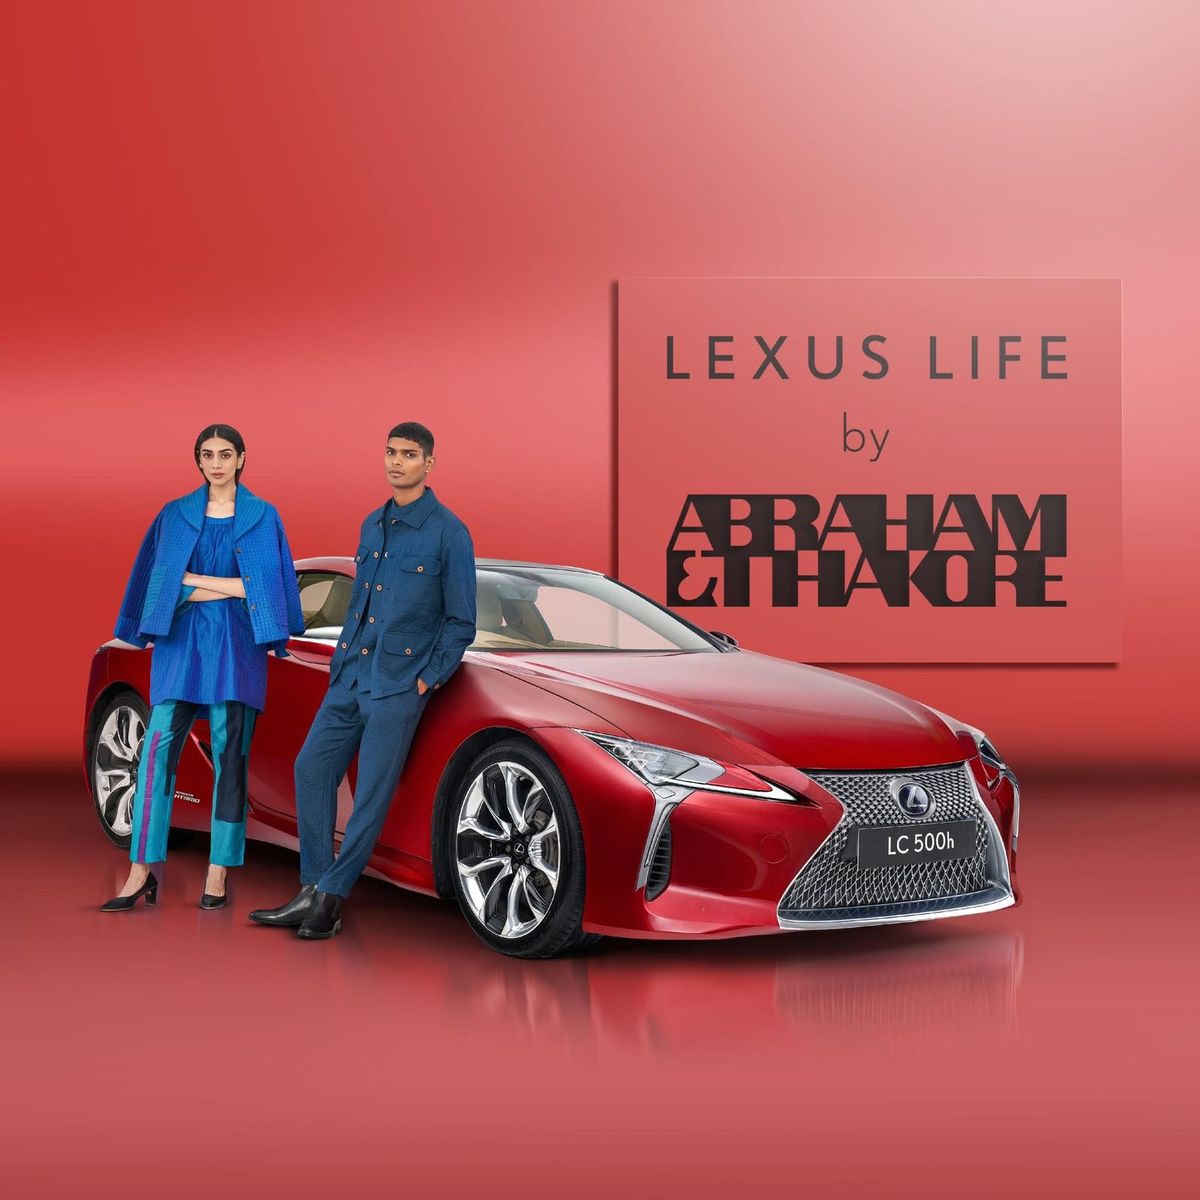 Introducing the improved Lexus LC 500h